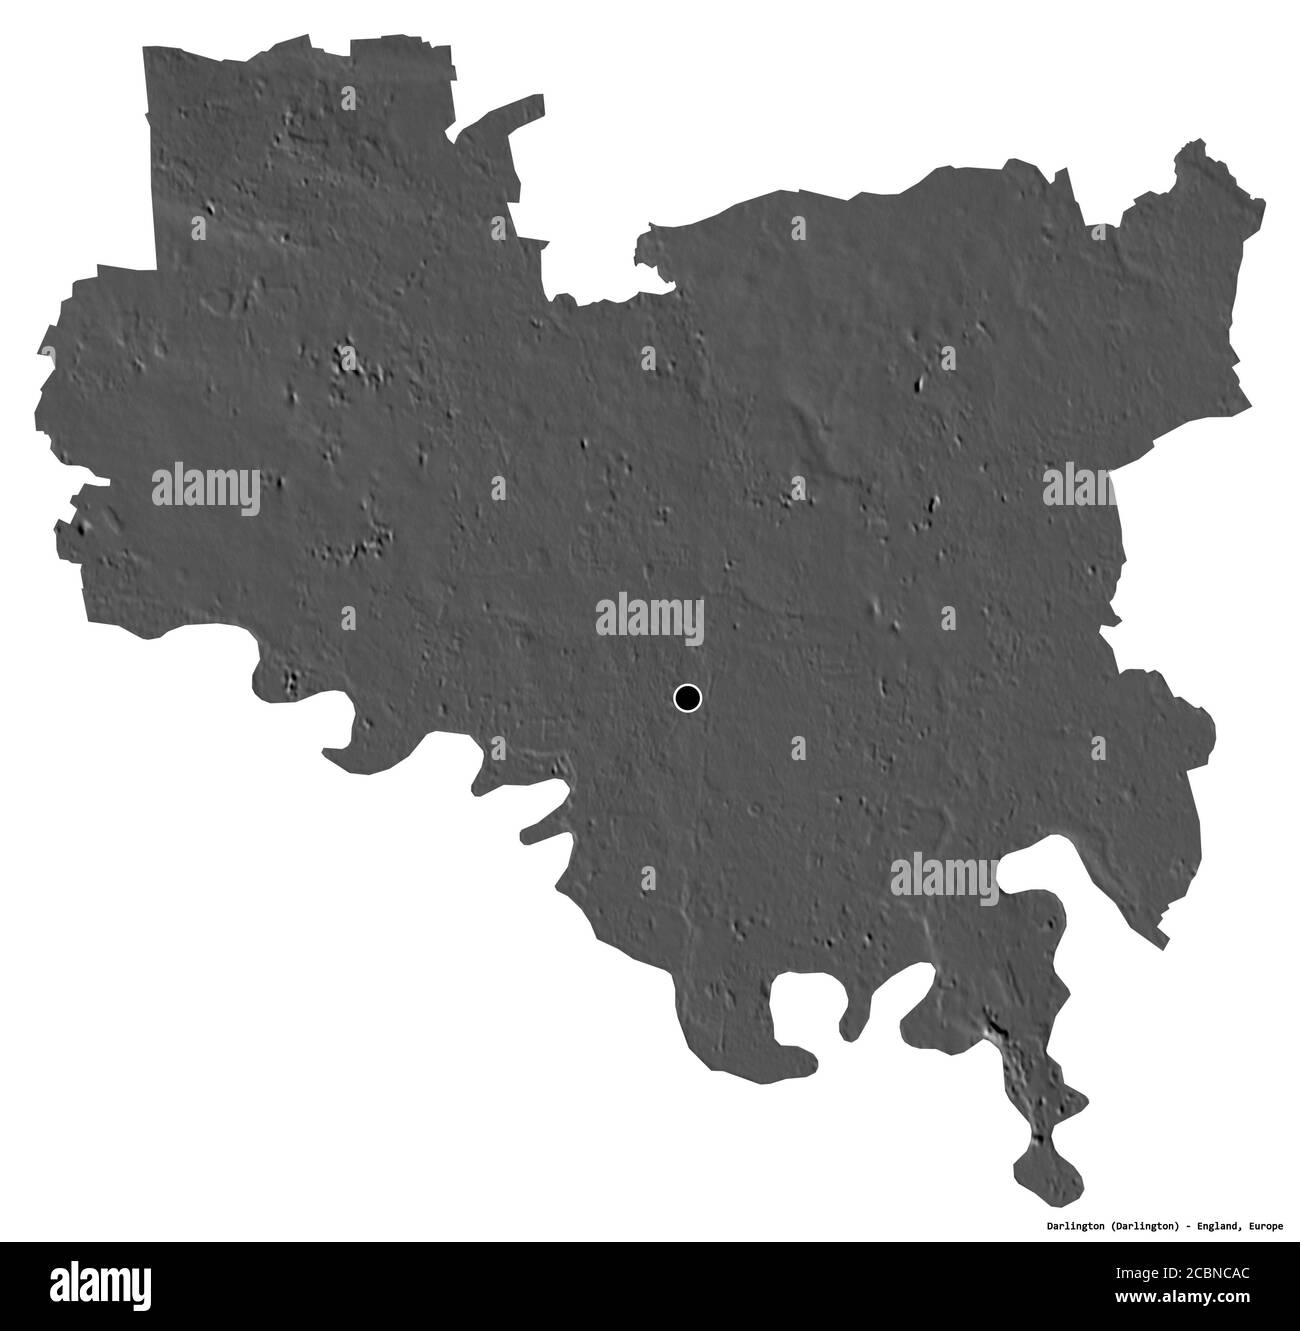 Shape of Darlington, unitary authority of England, with its capital isolated on white background. Bilevel elevation map. 3D rendering Stock Photo